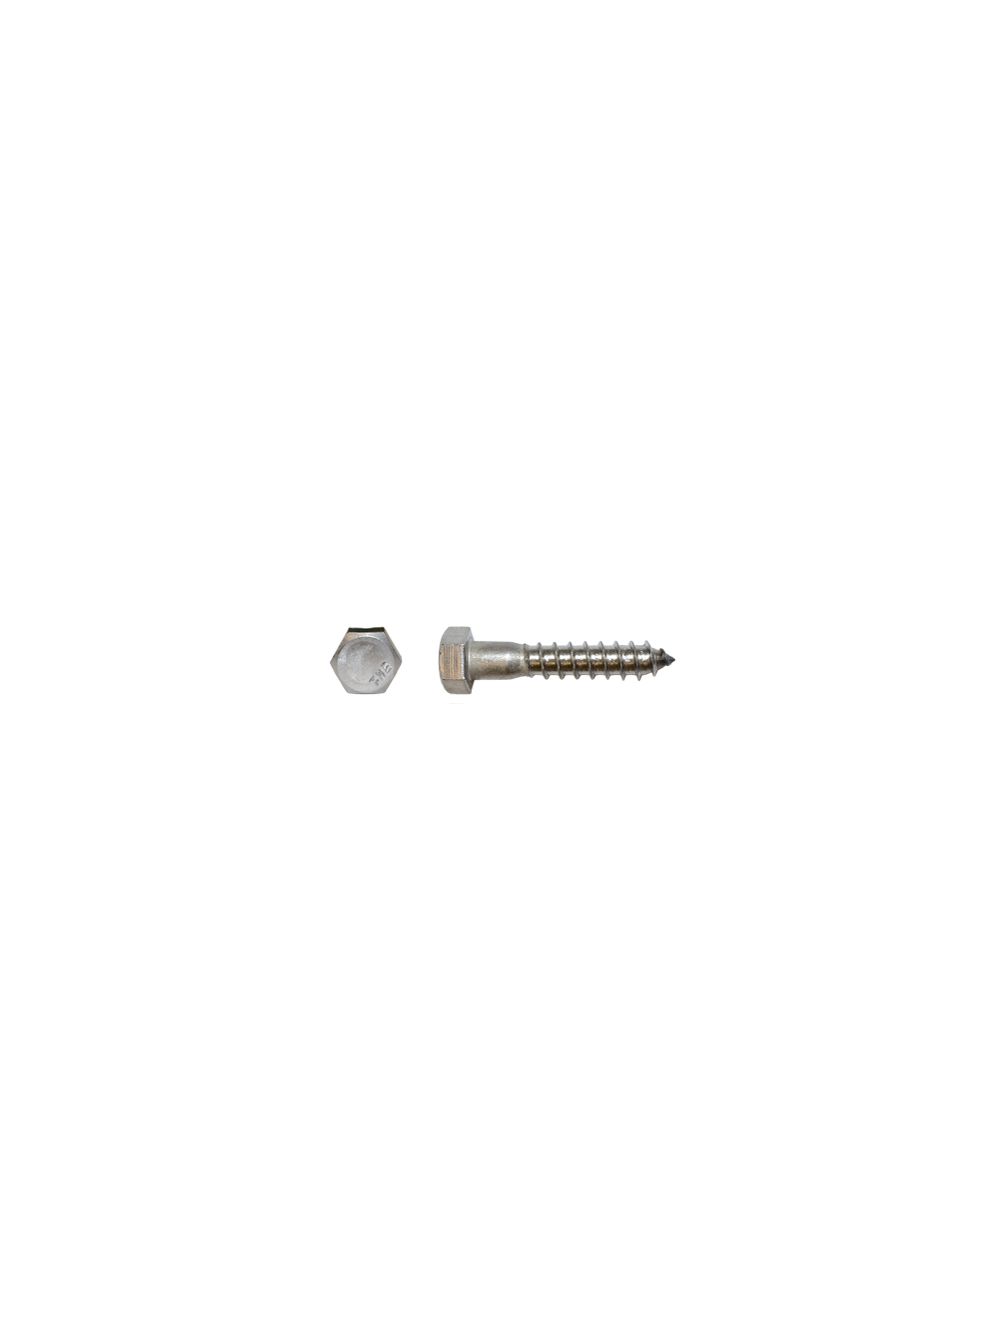 5/16 x 1 Qty-25 Hex Lag Screws 18-8 Stainless Steel 